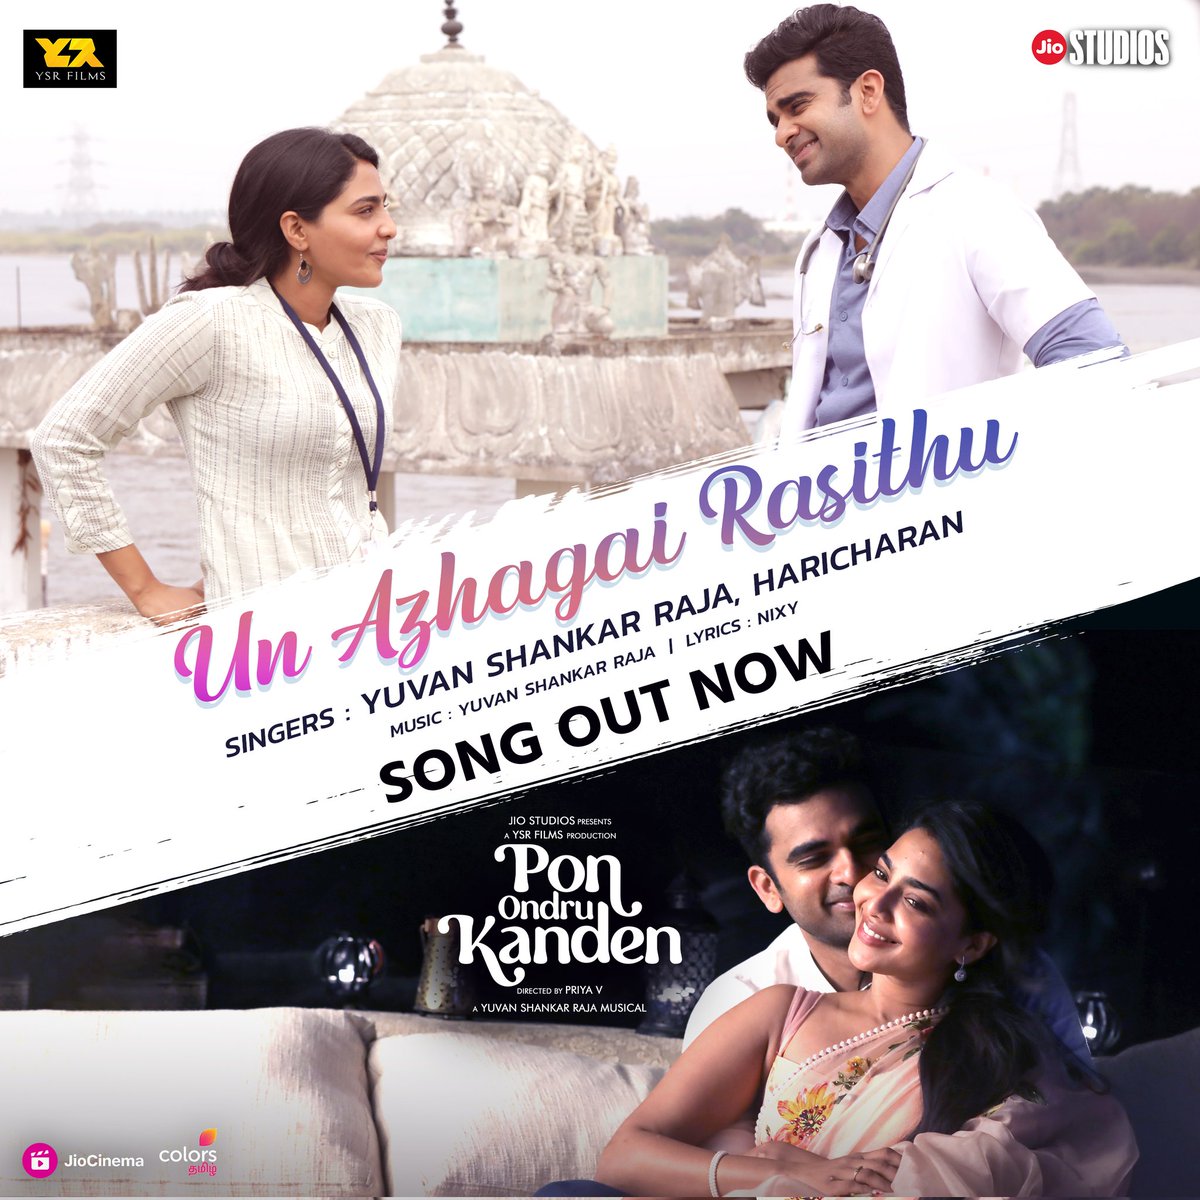 A glimpse of the past, a touch of the present, and a whisper of what could be. 'Un Azhagai Rasithu Paakka' unveils a love story unlike any other. Song out now! youtube.com/watch?v=nwP3Gz… @AshokSelvan @AishuL_ @iamvasanthravi #JyotiDeshpande @thisisysr @directorpriya_v @bagath_at